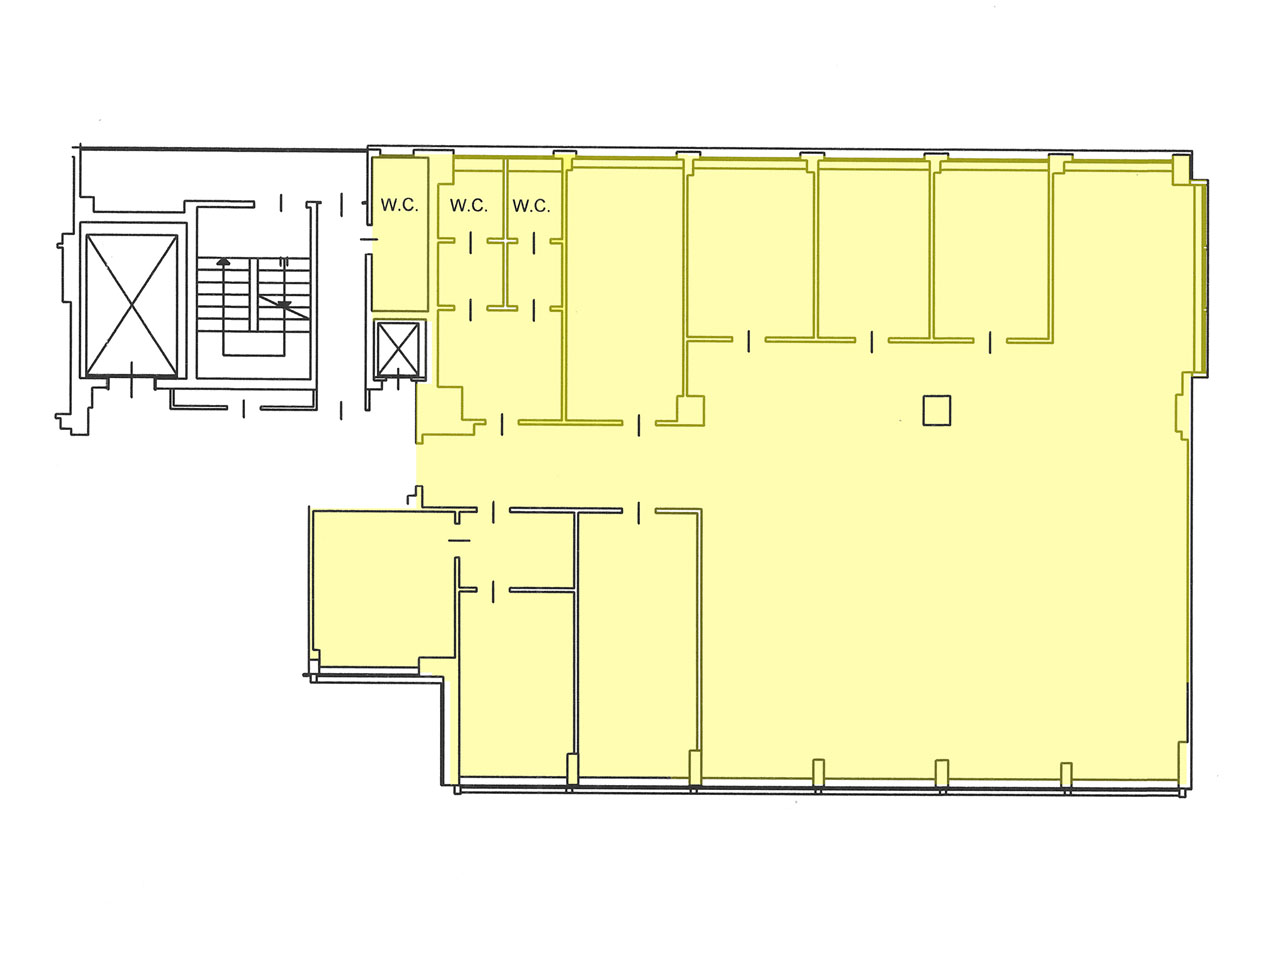 Floorplan - Office for rent in Milan - 305 mq (3283 sqft) - via Fantoli / Mecenate - close to East ring road and Linate Airport